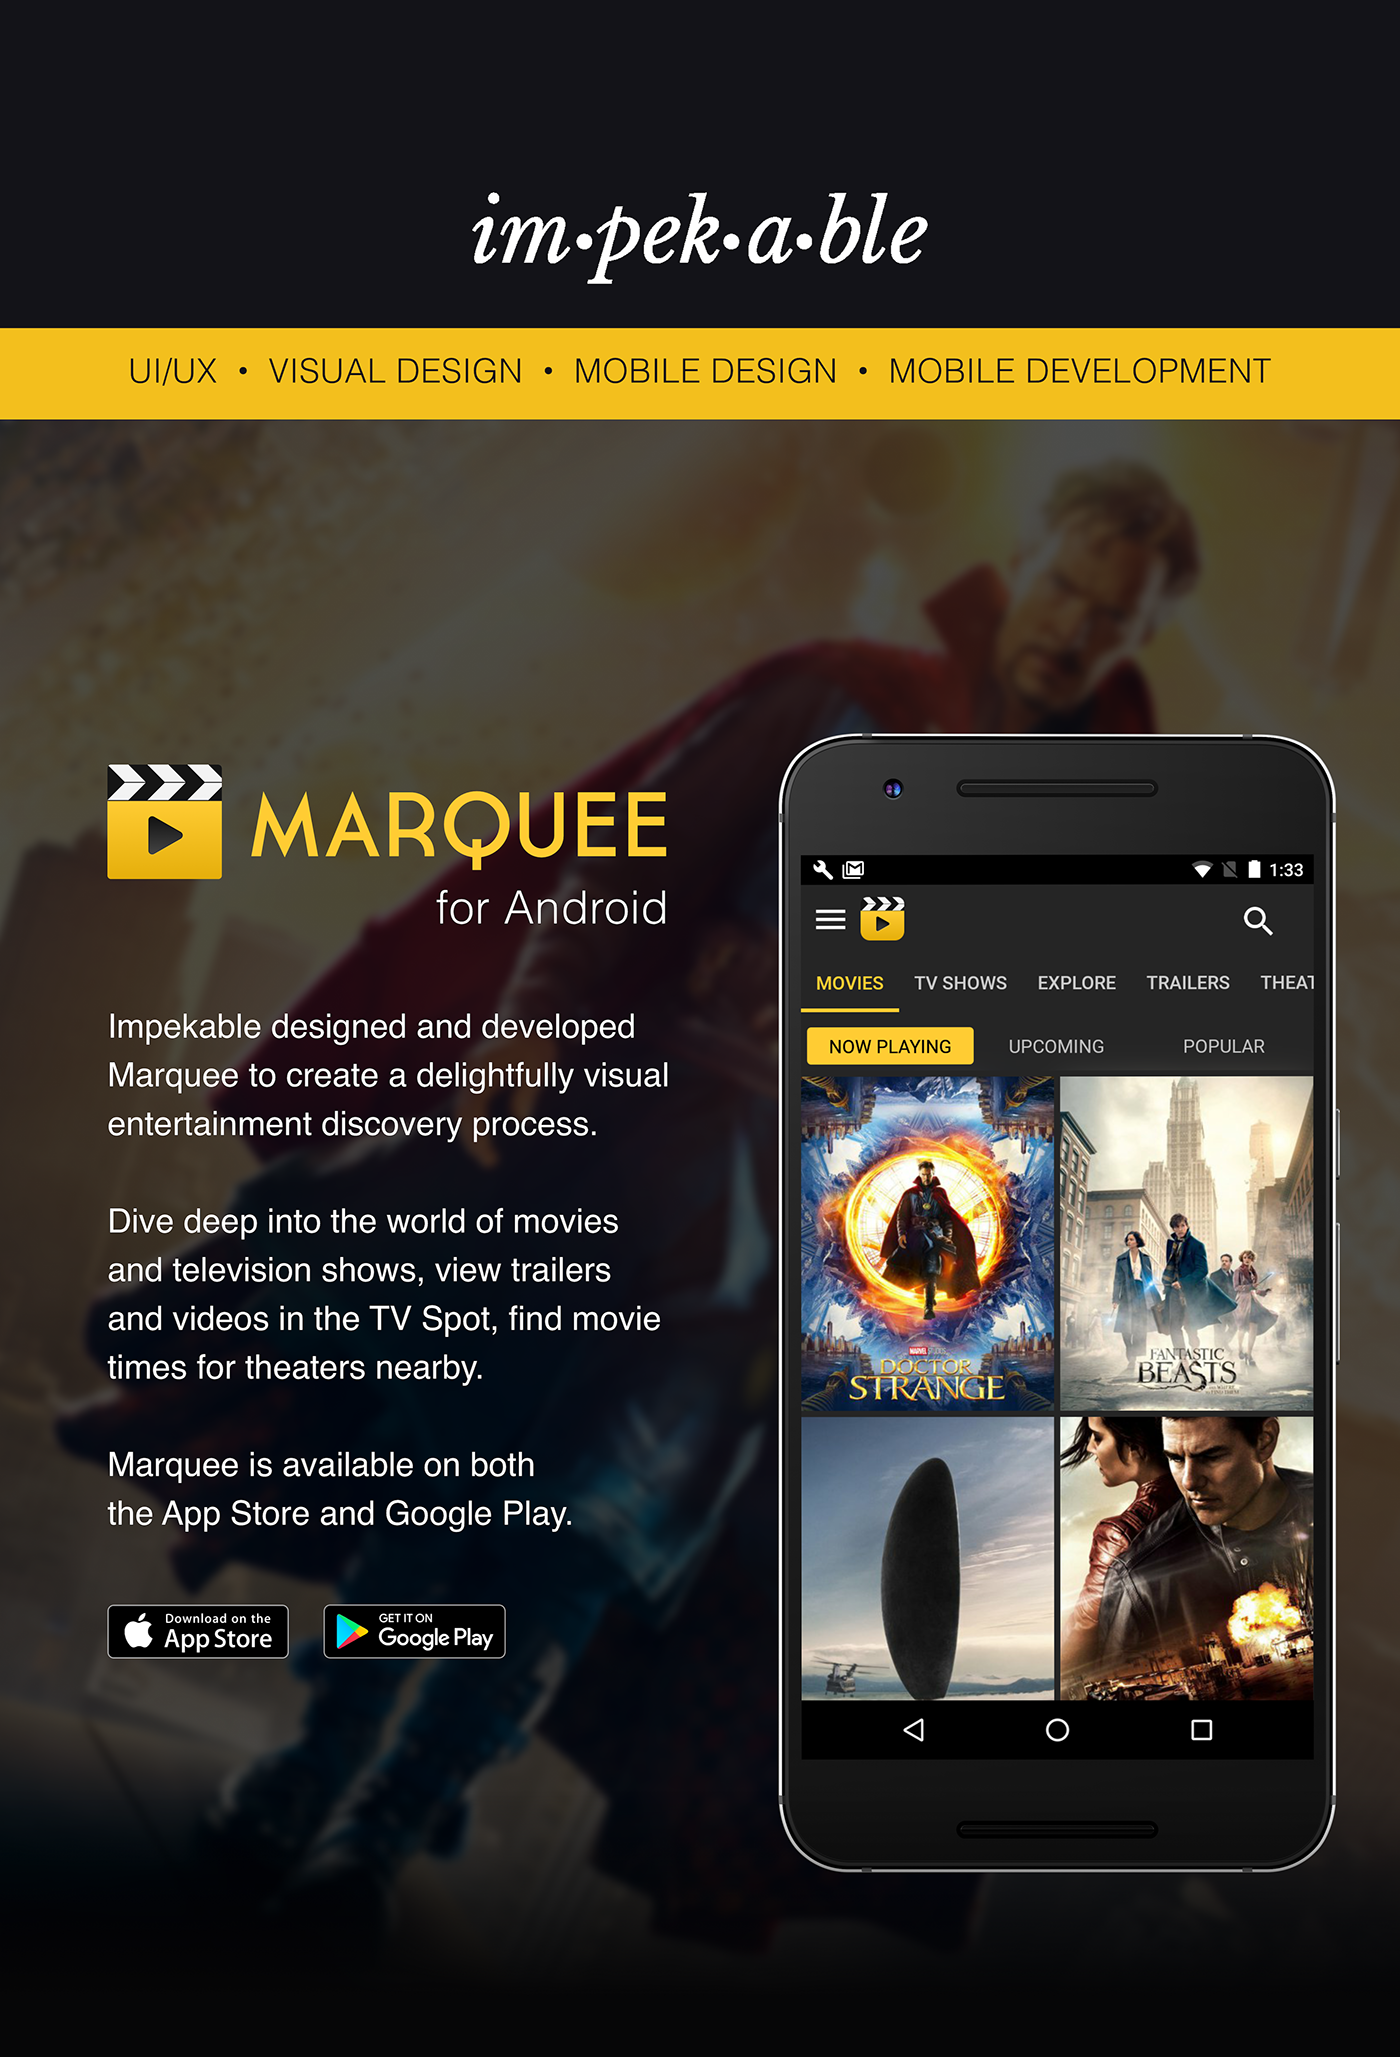 Movies Entertainment UI ux android television trailers mobile development visual design